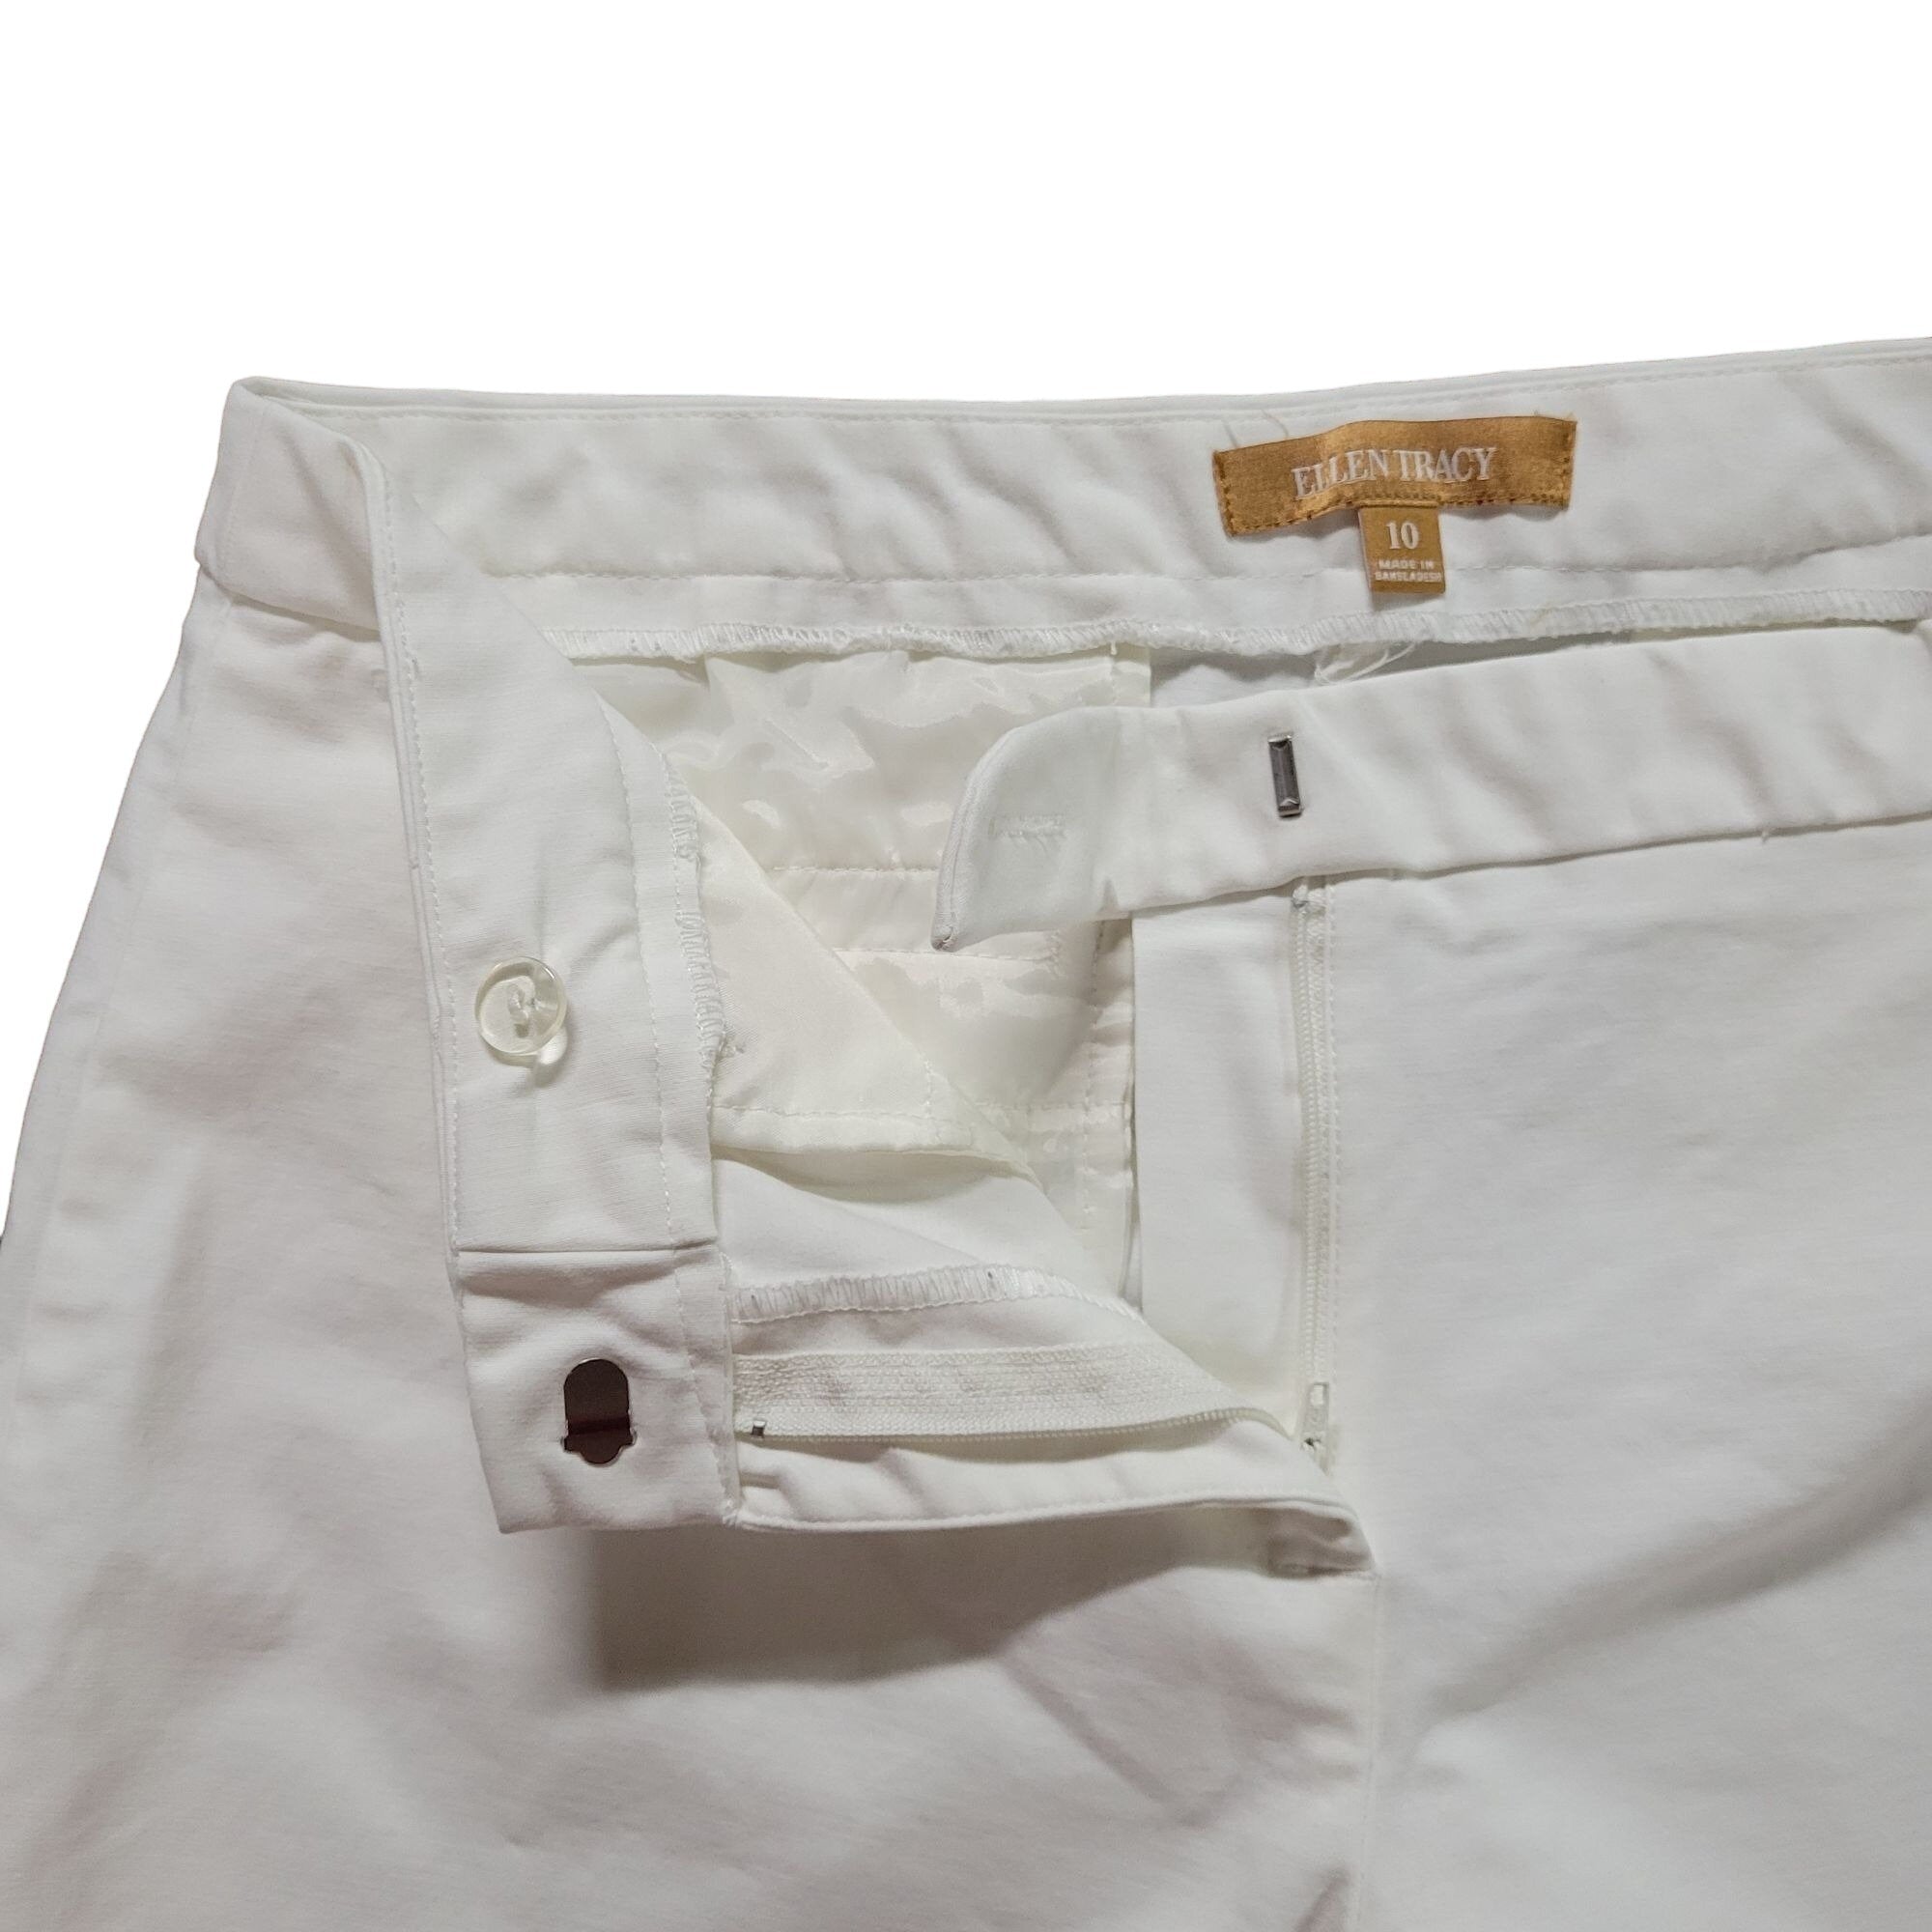 Ellen Tracy Business or Casual Cropped Women's White Pants Size 10